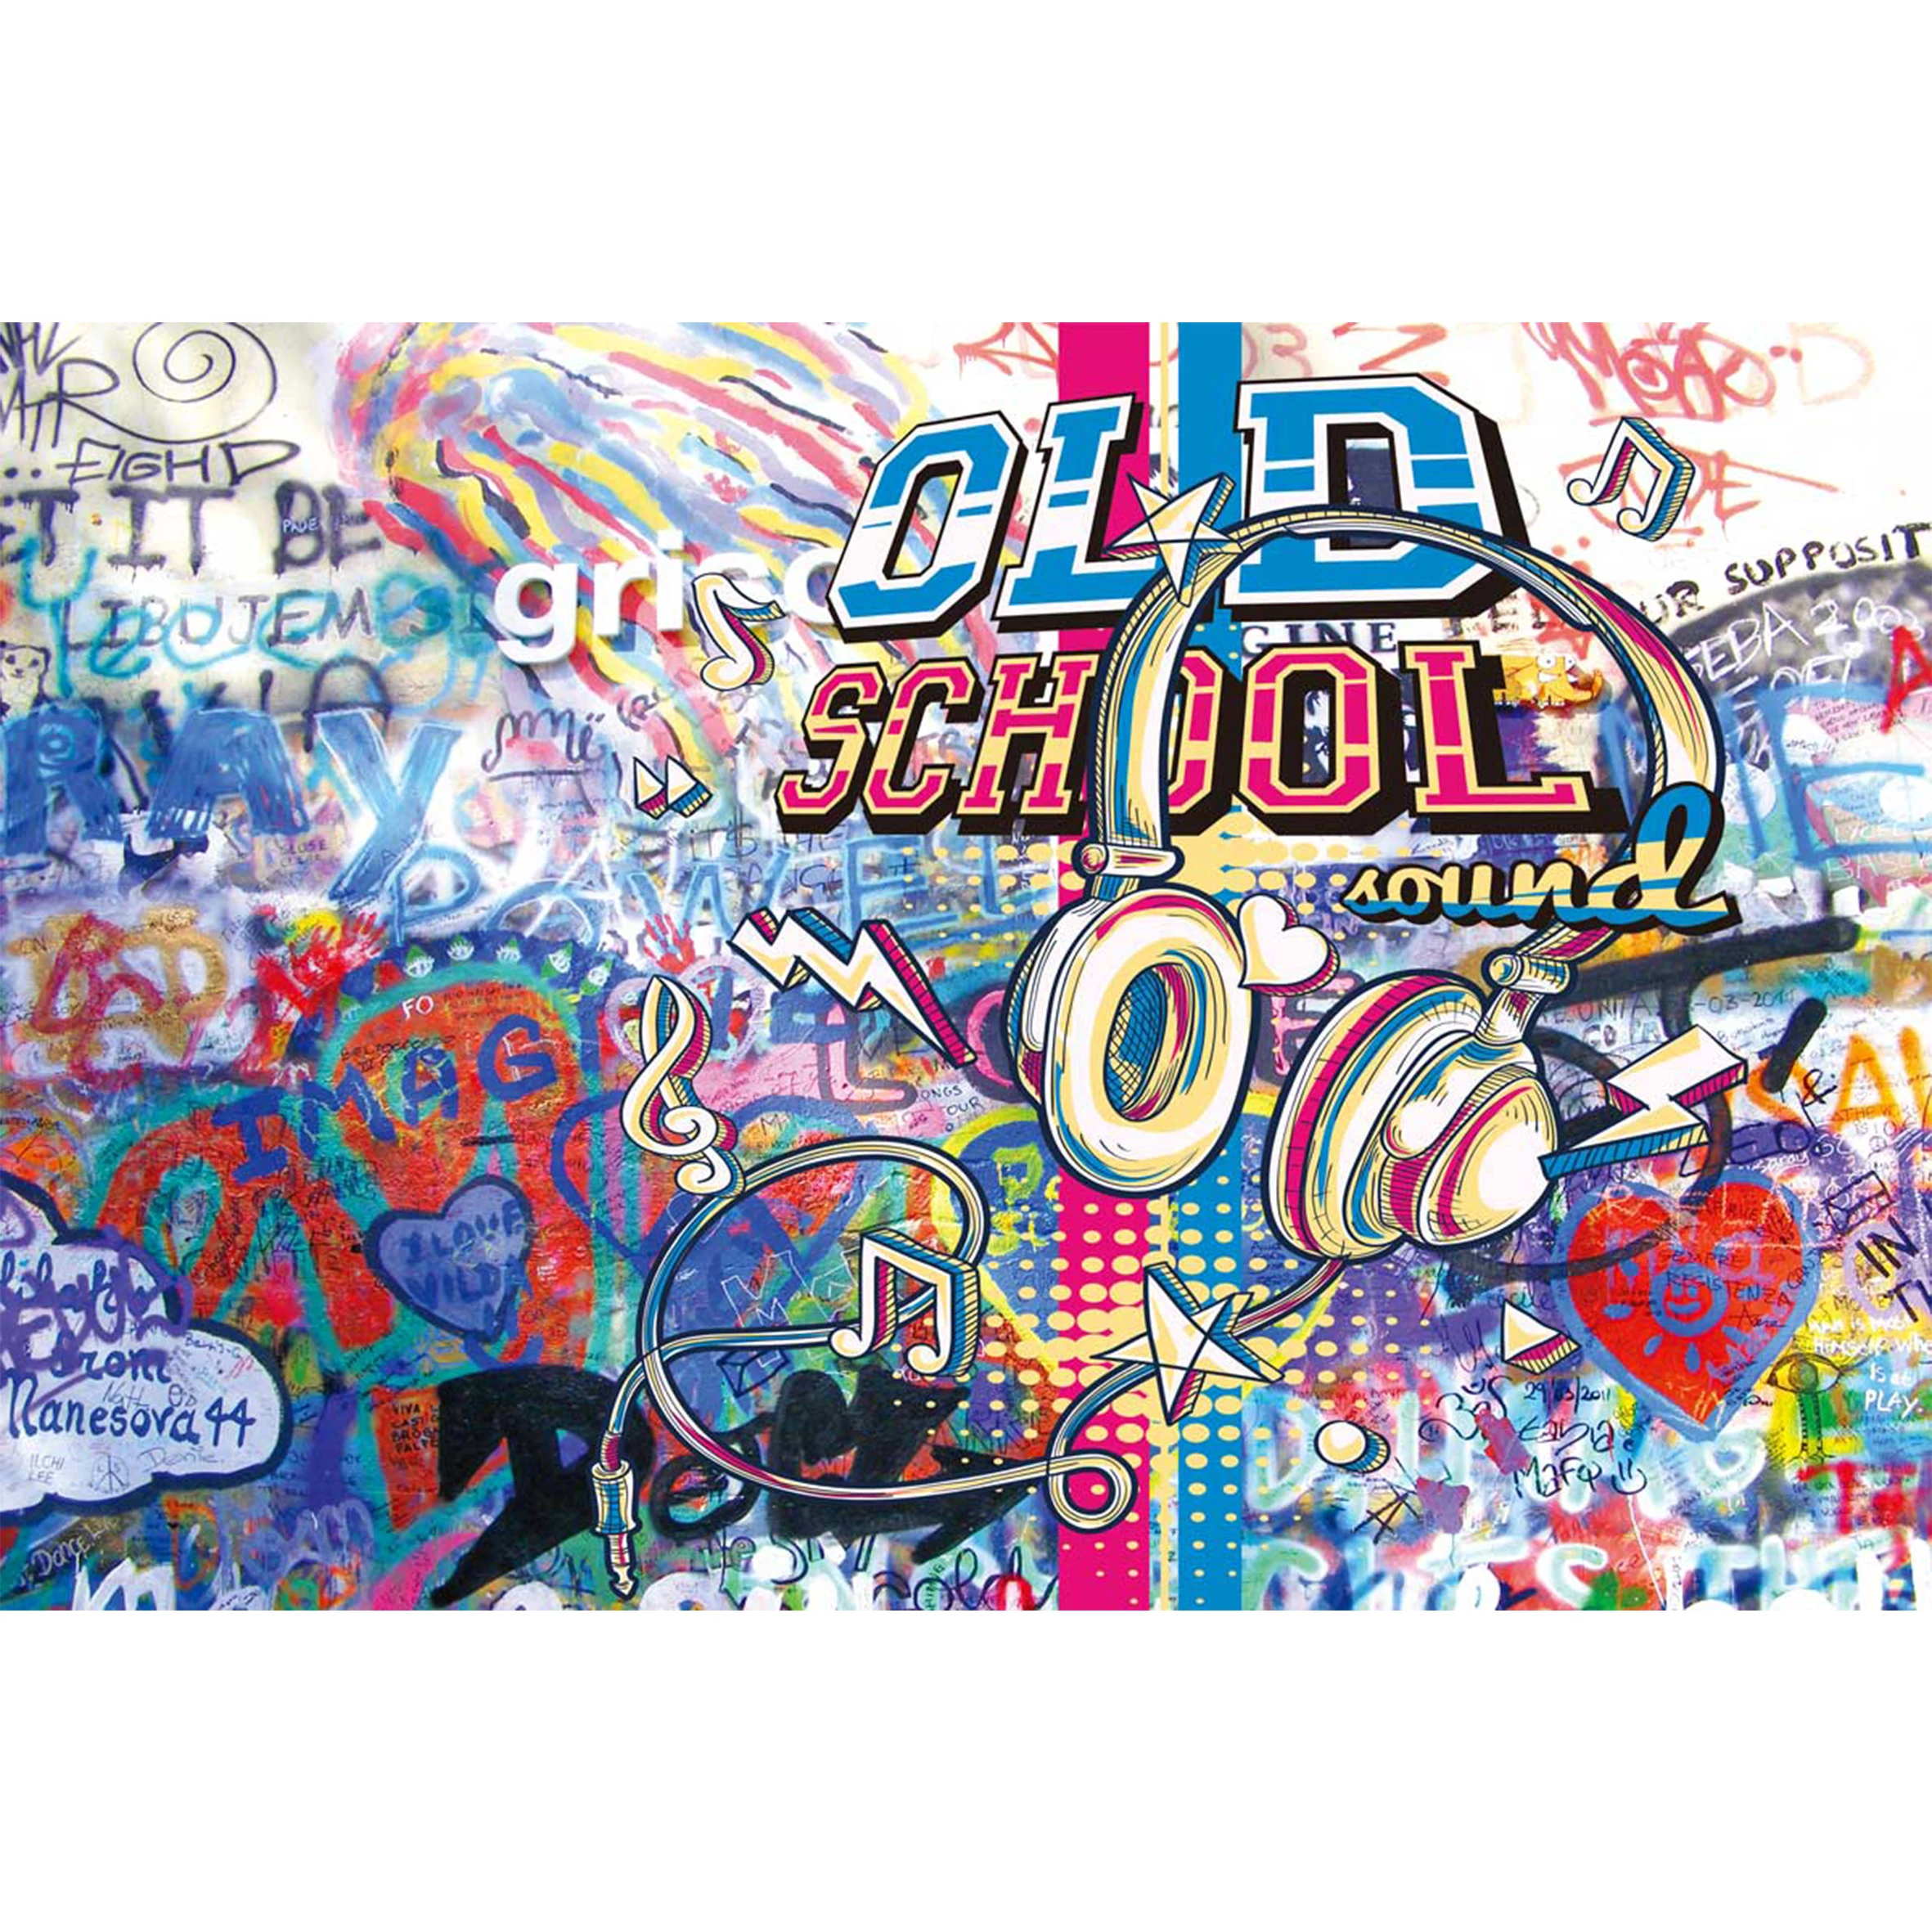 GoEoo Graffiti Photography Background Old School Hip Hop Backdrops Photo Party Studio Props Vinly 7x5 GoEoo-dn042